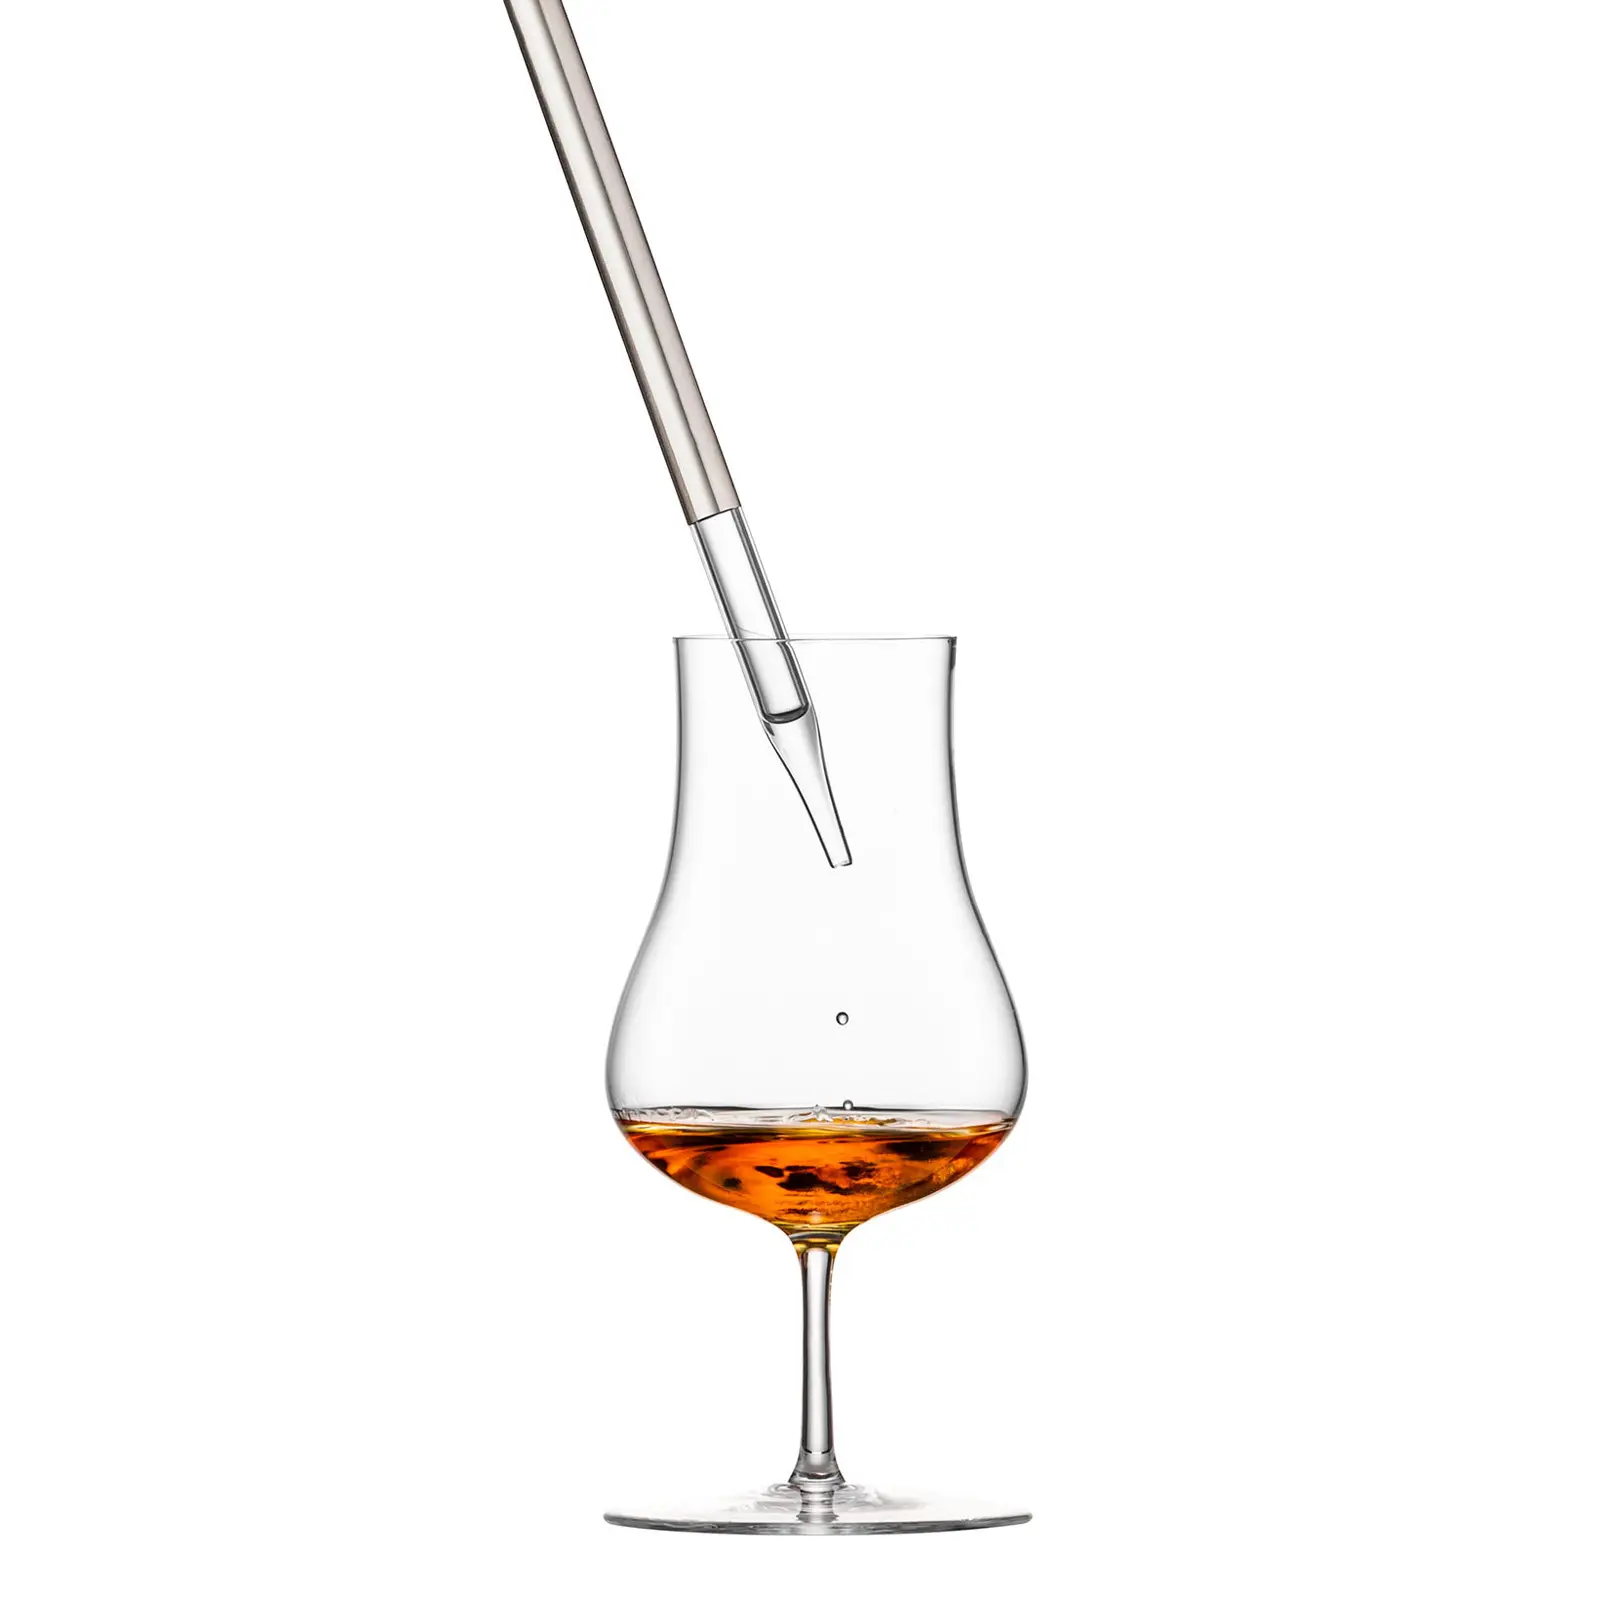 Gentleman Whiskypipette